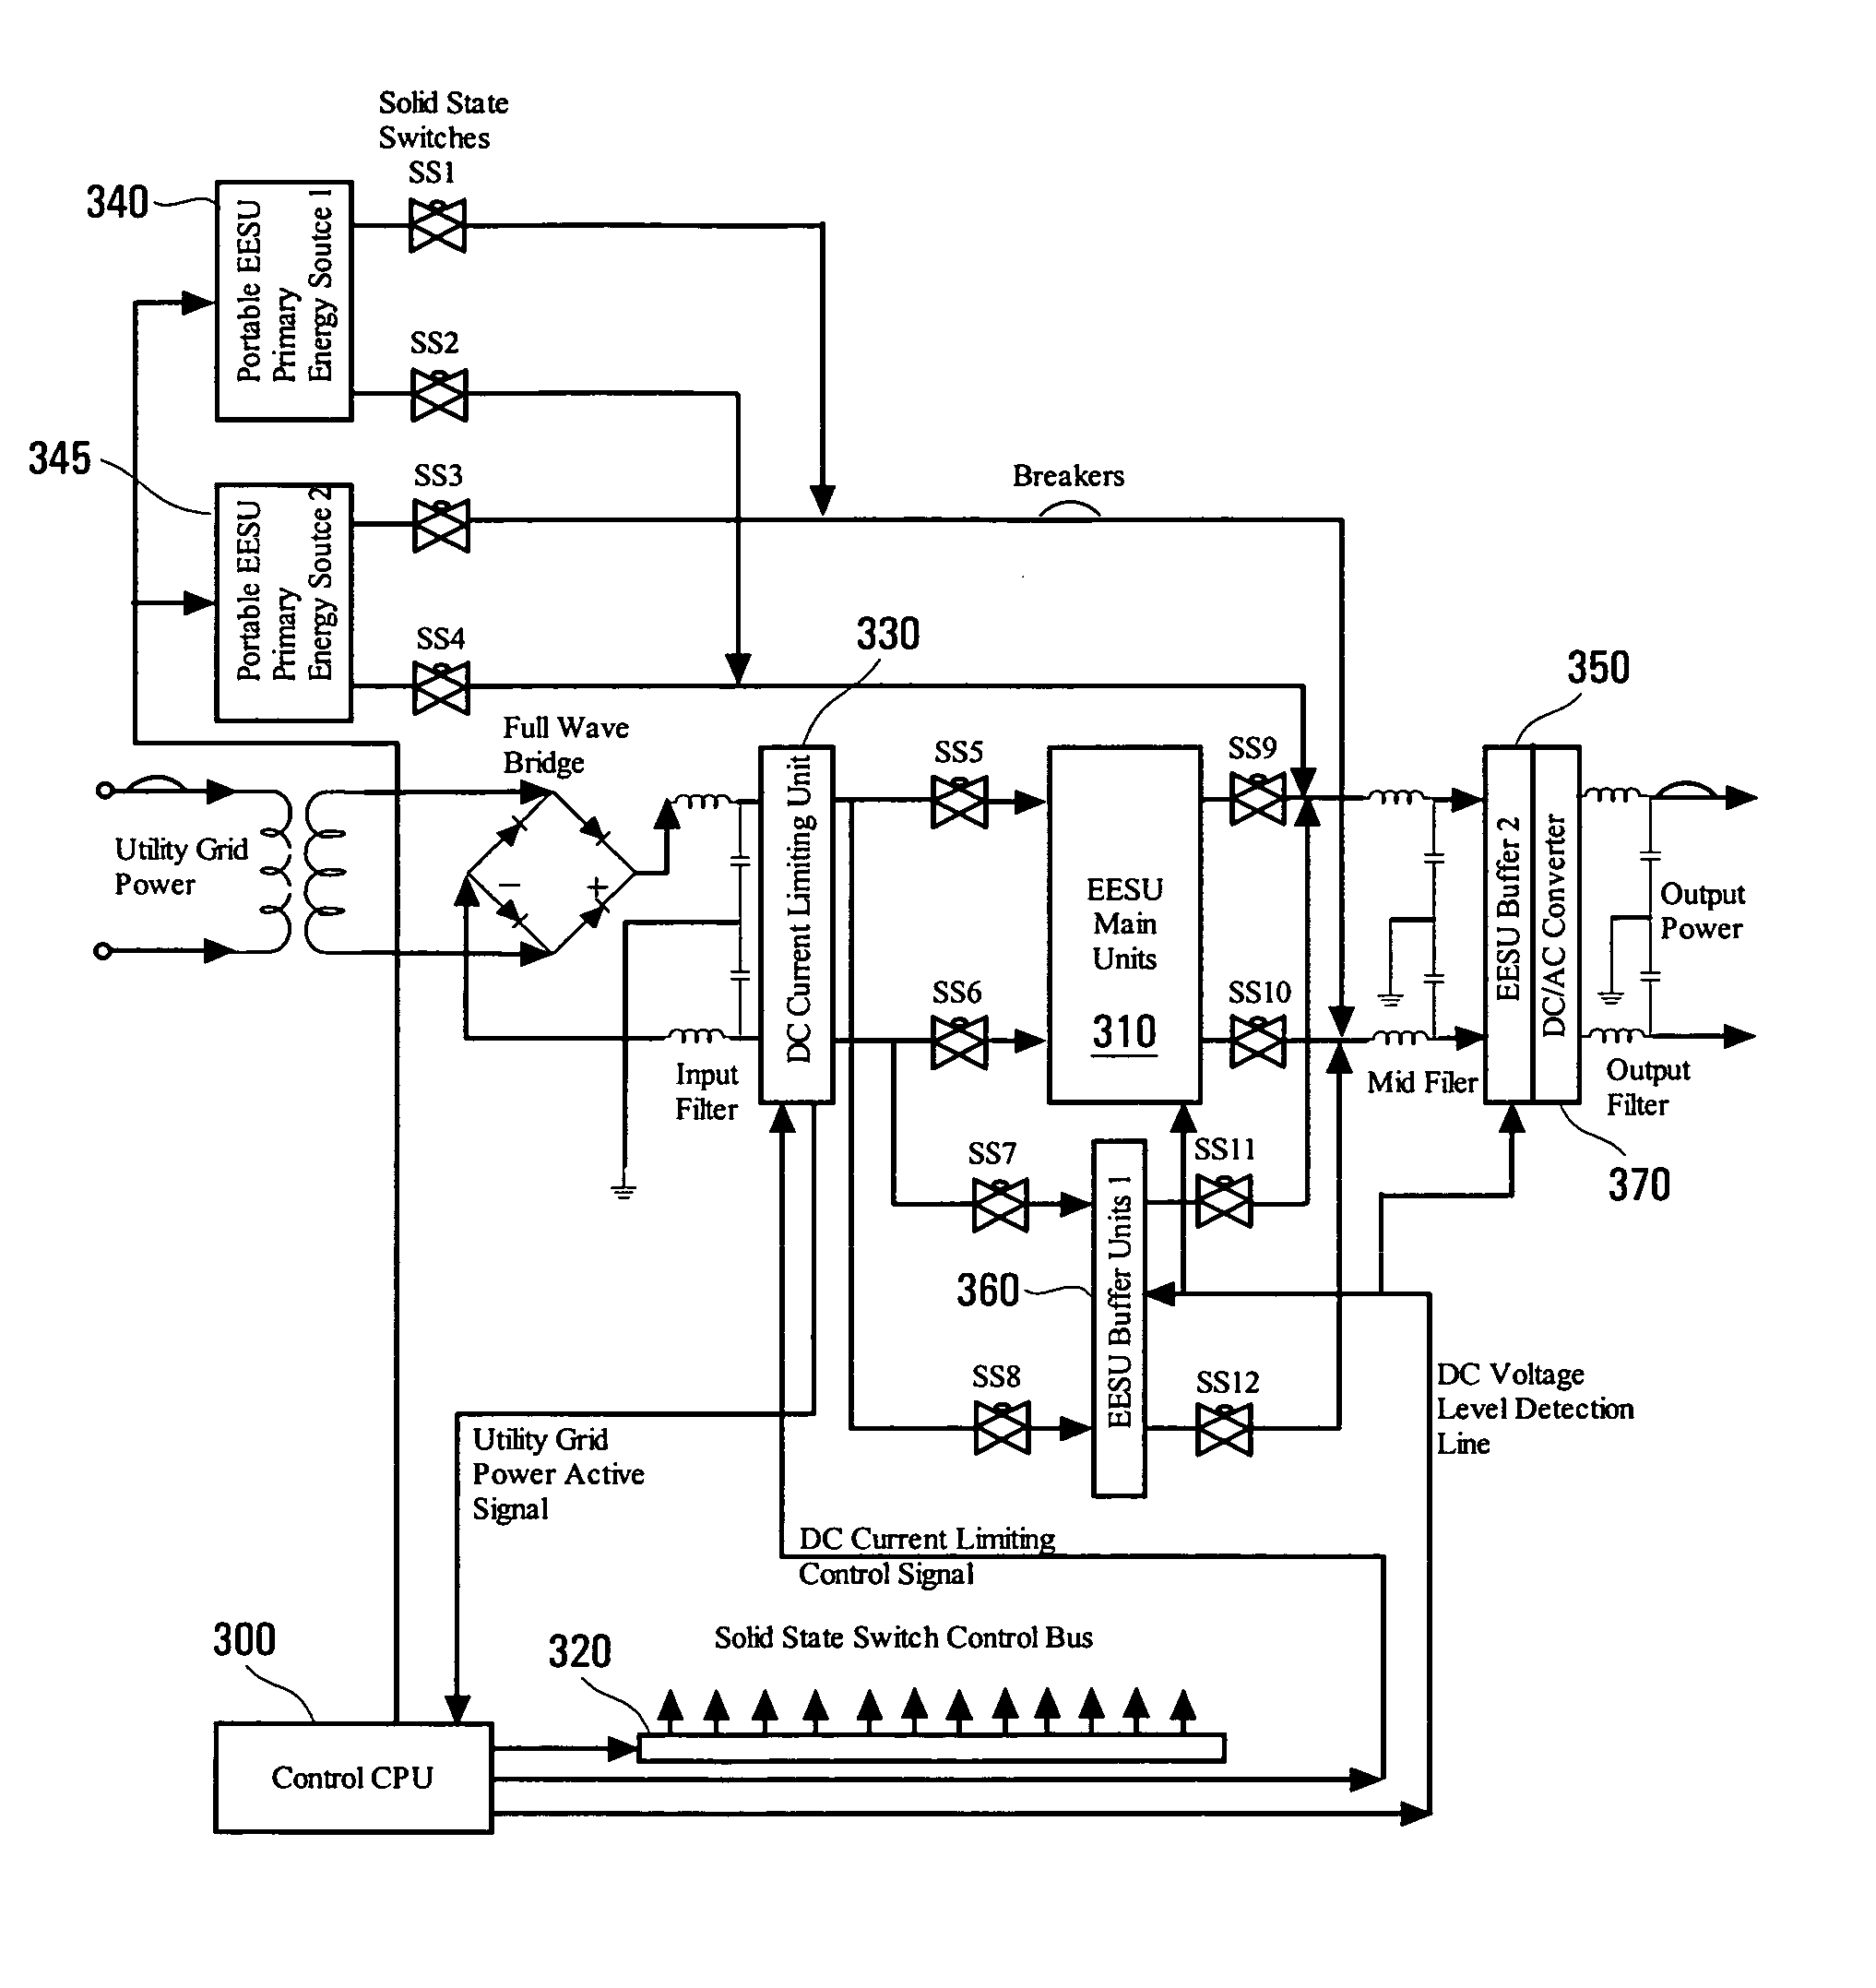 Systems and methods for utility grid power averaging, long term uninterruptible power supply, power line isolation from noise and transients and intelligent power transfer on demand